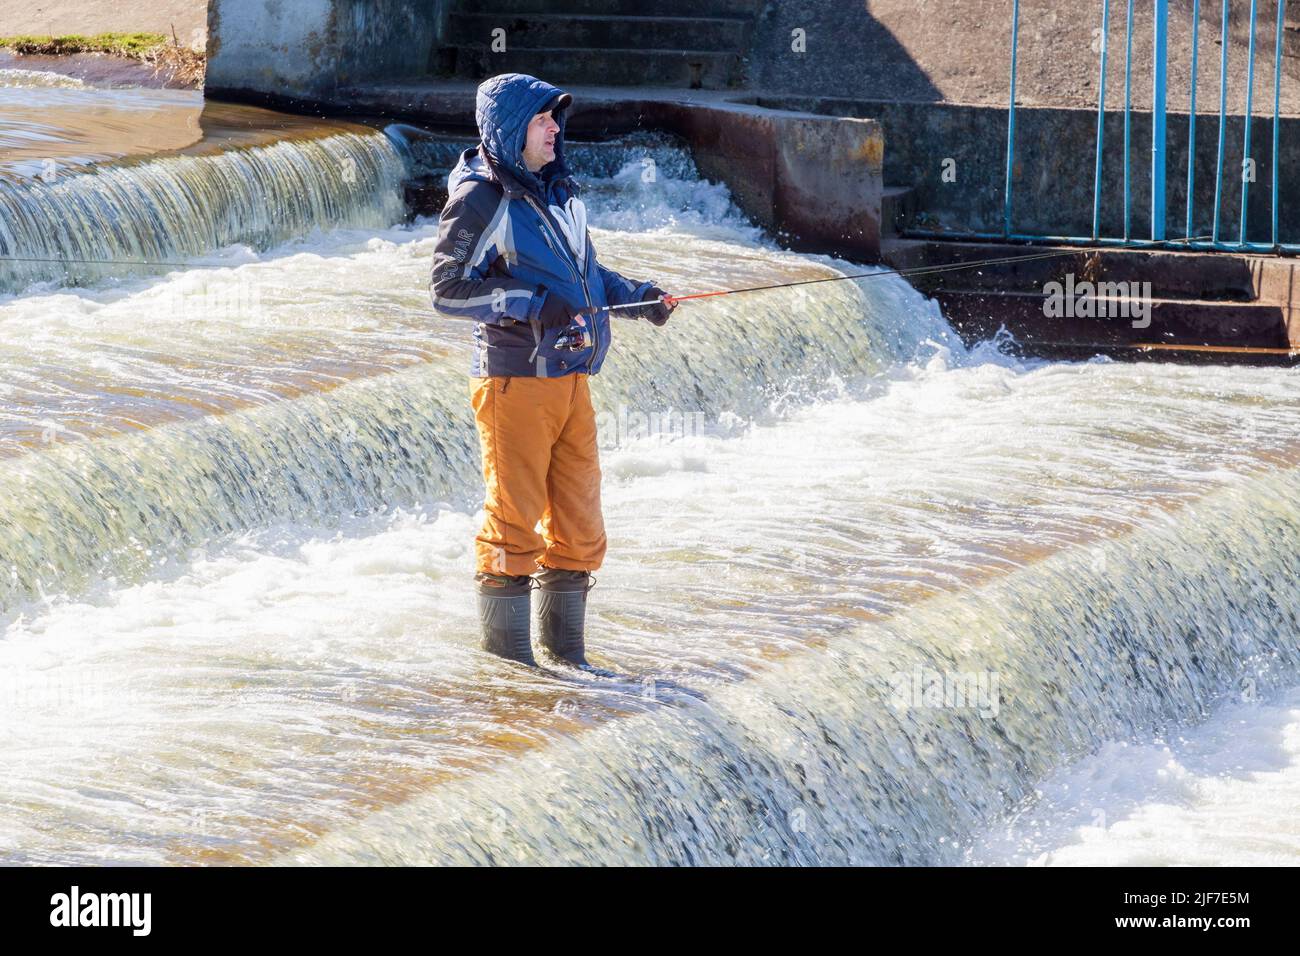 Minsk, Belarus - March 27, 2017: Man catches fish on a waterfall standing on a waterfall roll Stock Photo